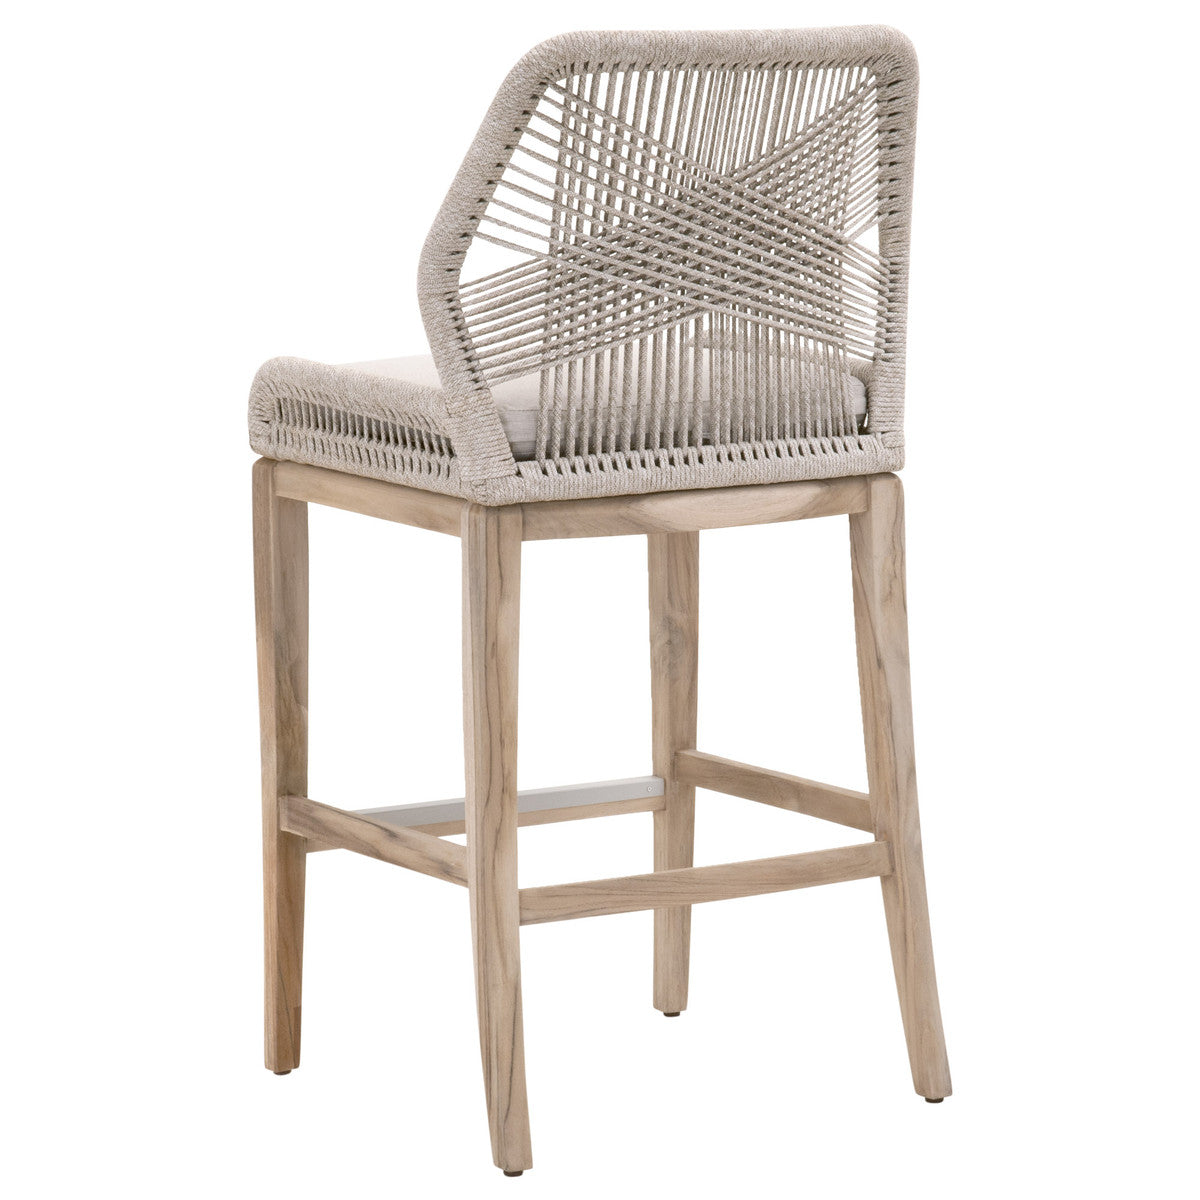 Loom Outdoor Barstool in Taupe & White Flat Rope, Performance Pumice, Gray Teak - 6808BS.WTA/PUM/GT